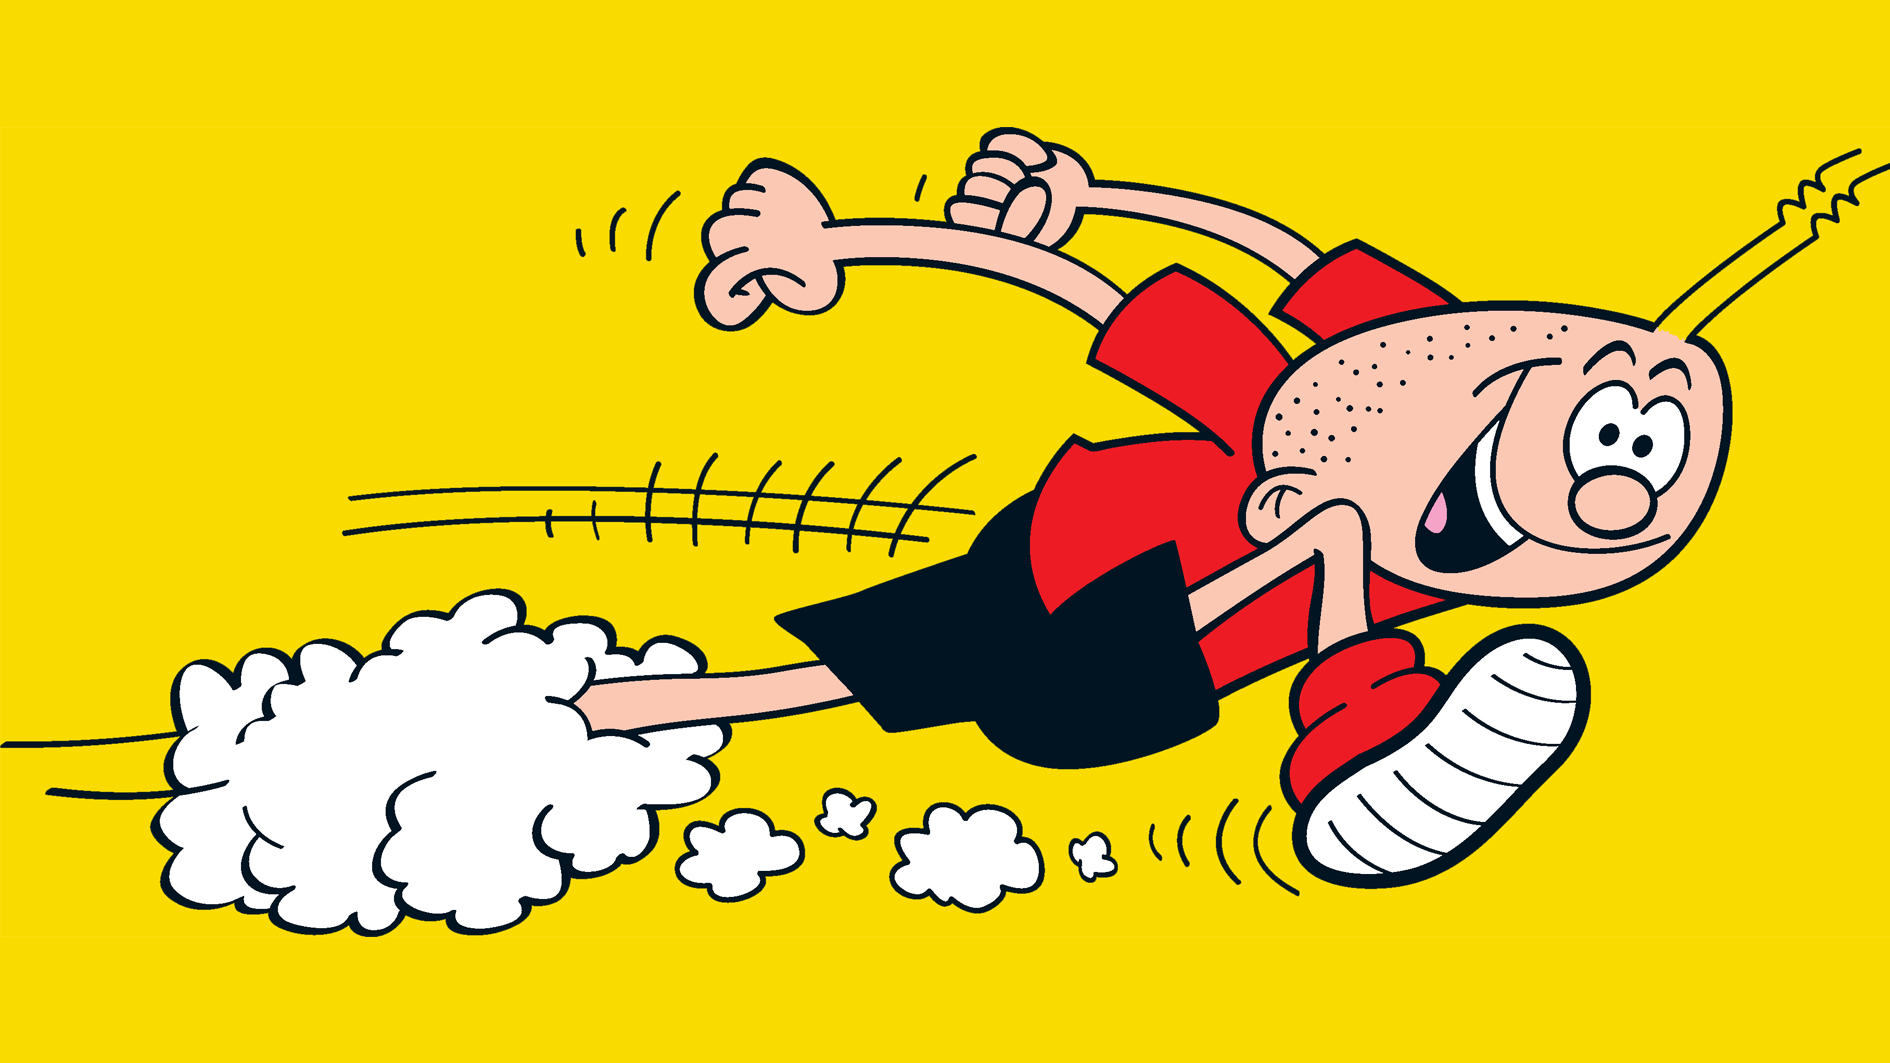 Billy Whizz from Beano - The Fastest Boy in the World